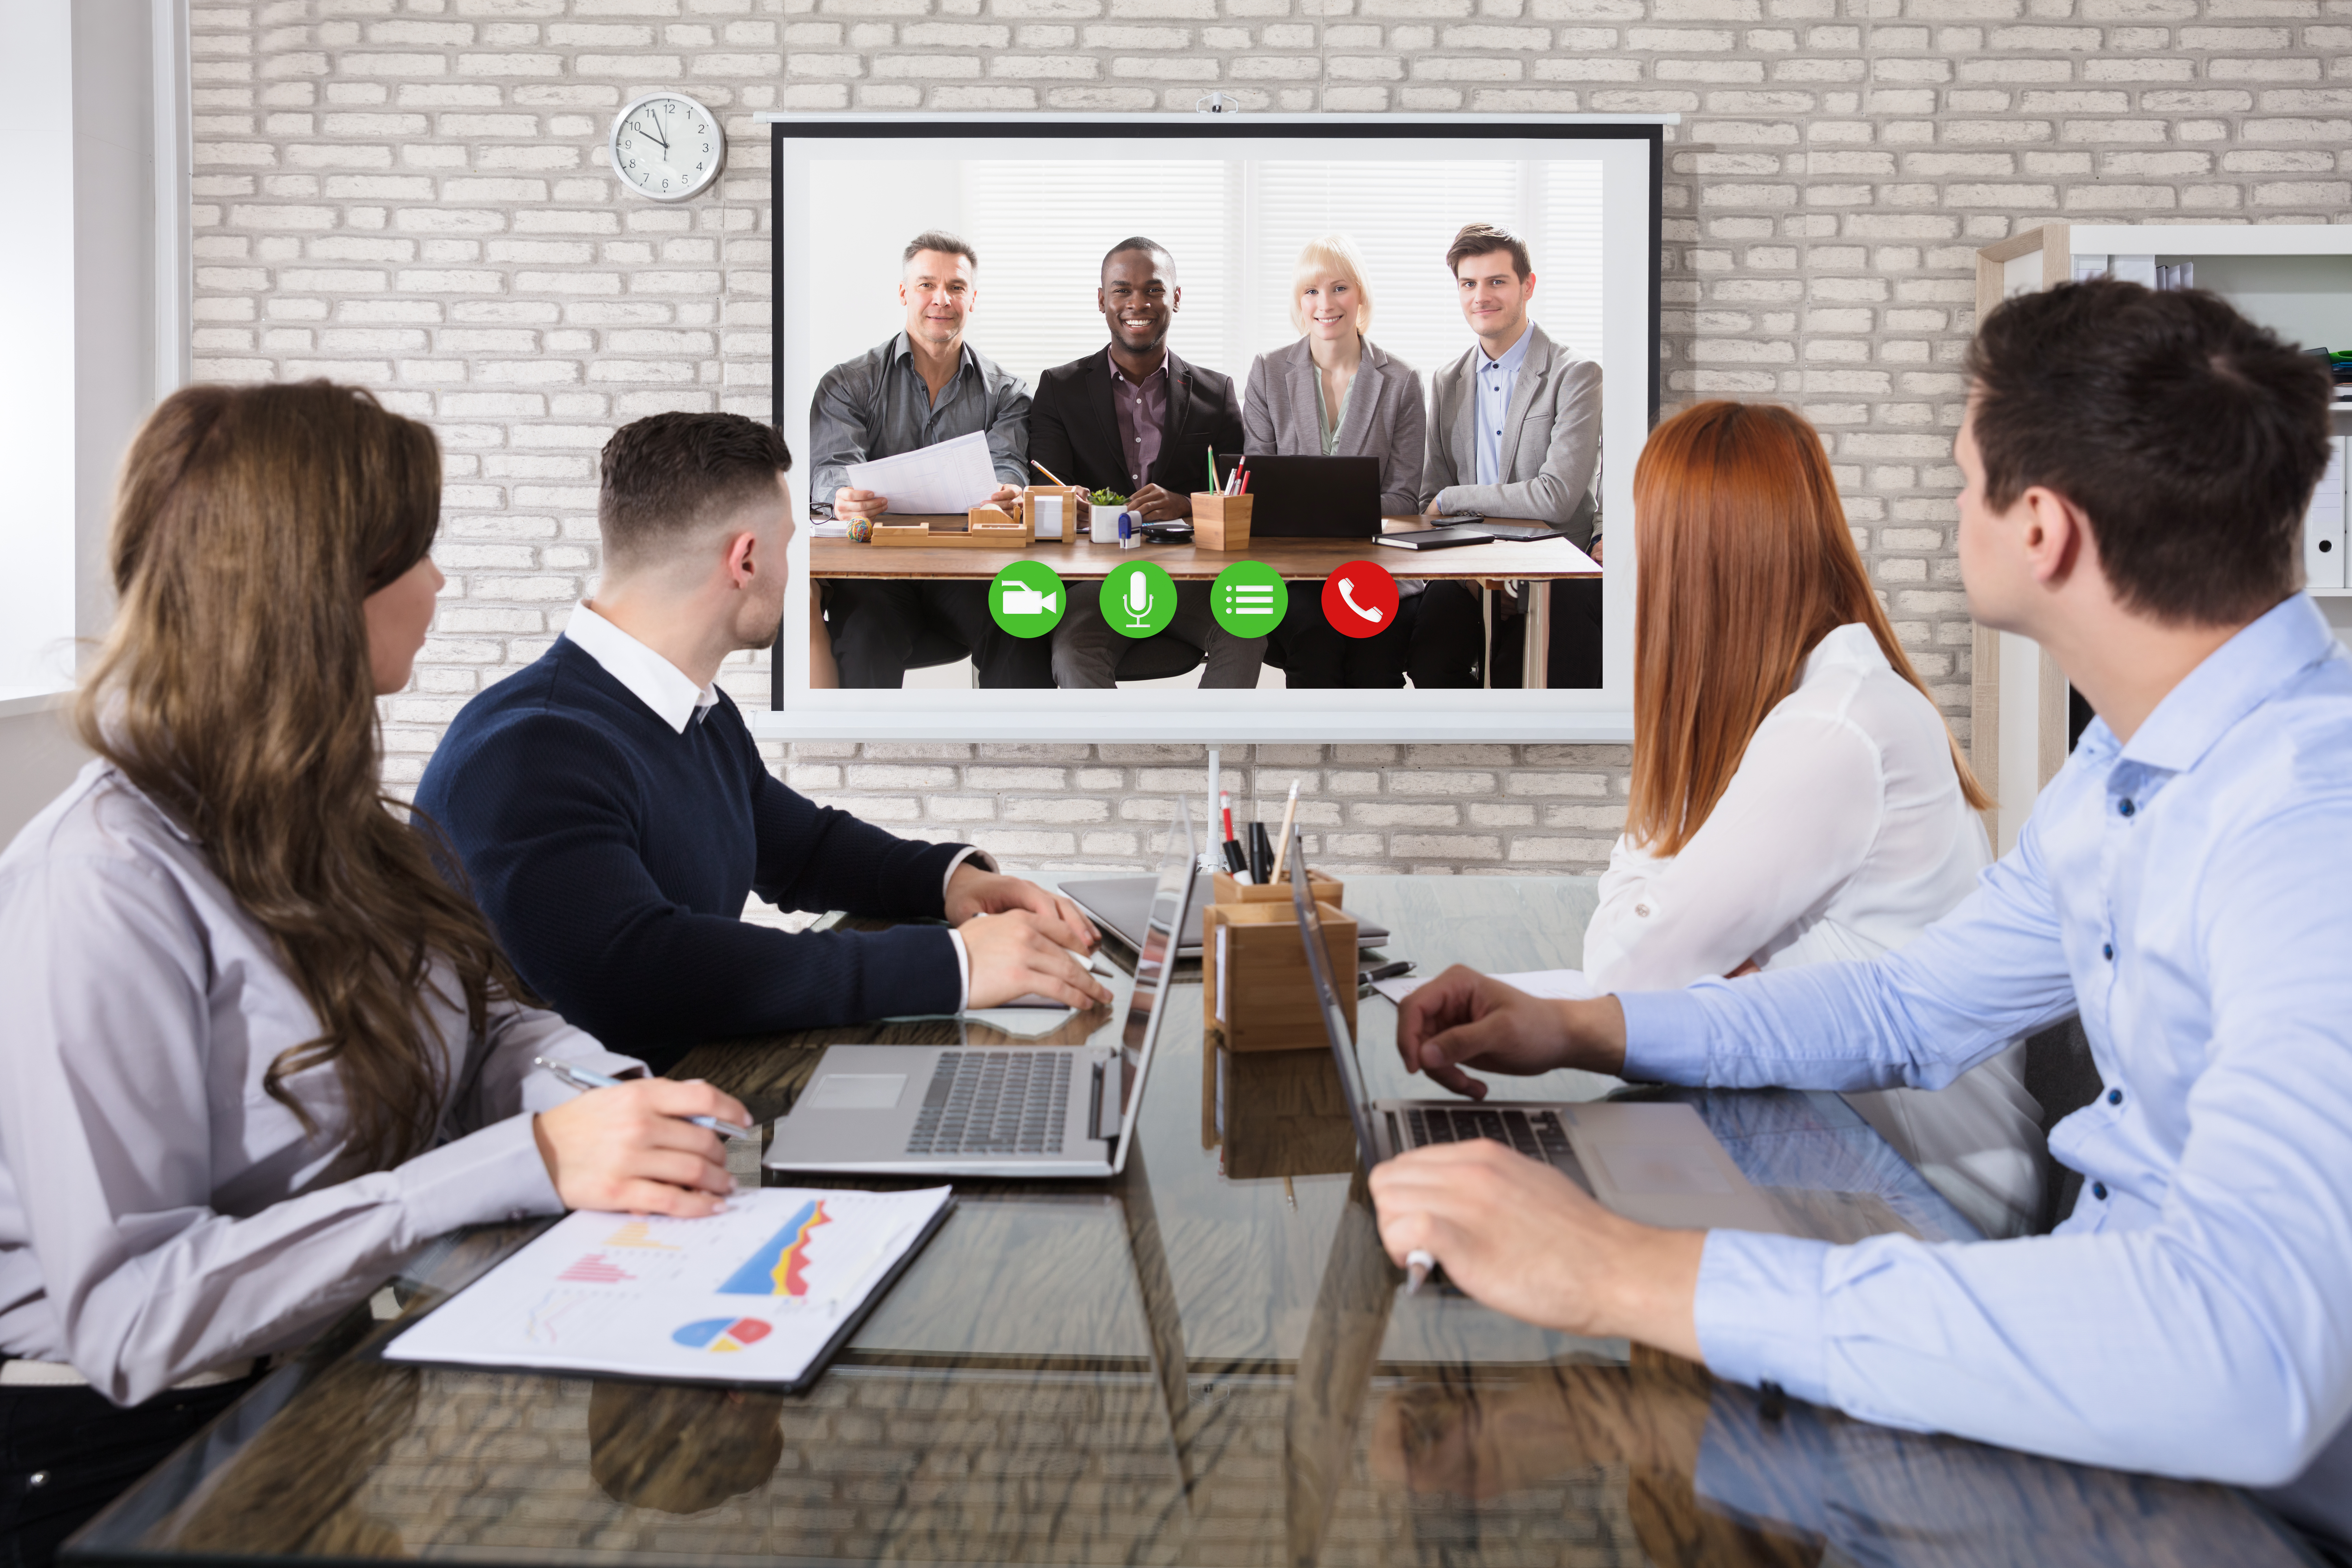 5 Video Conferencing Room Ideas to Stay on Trend